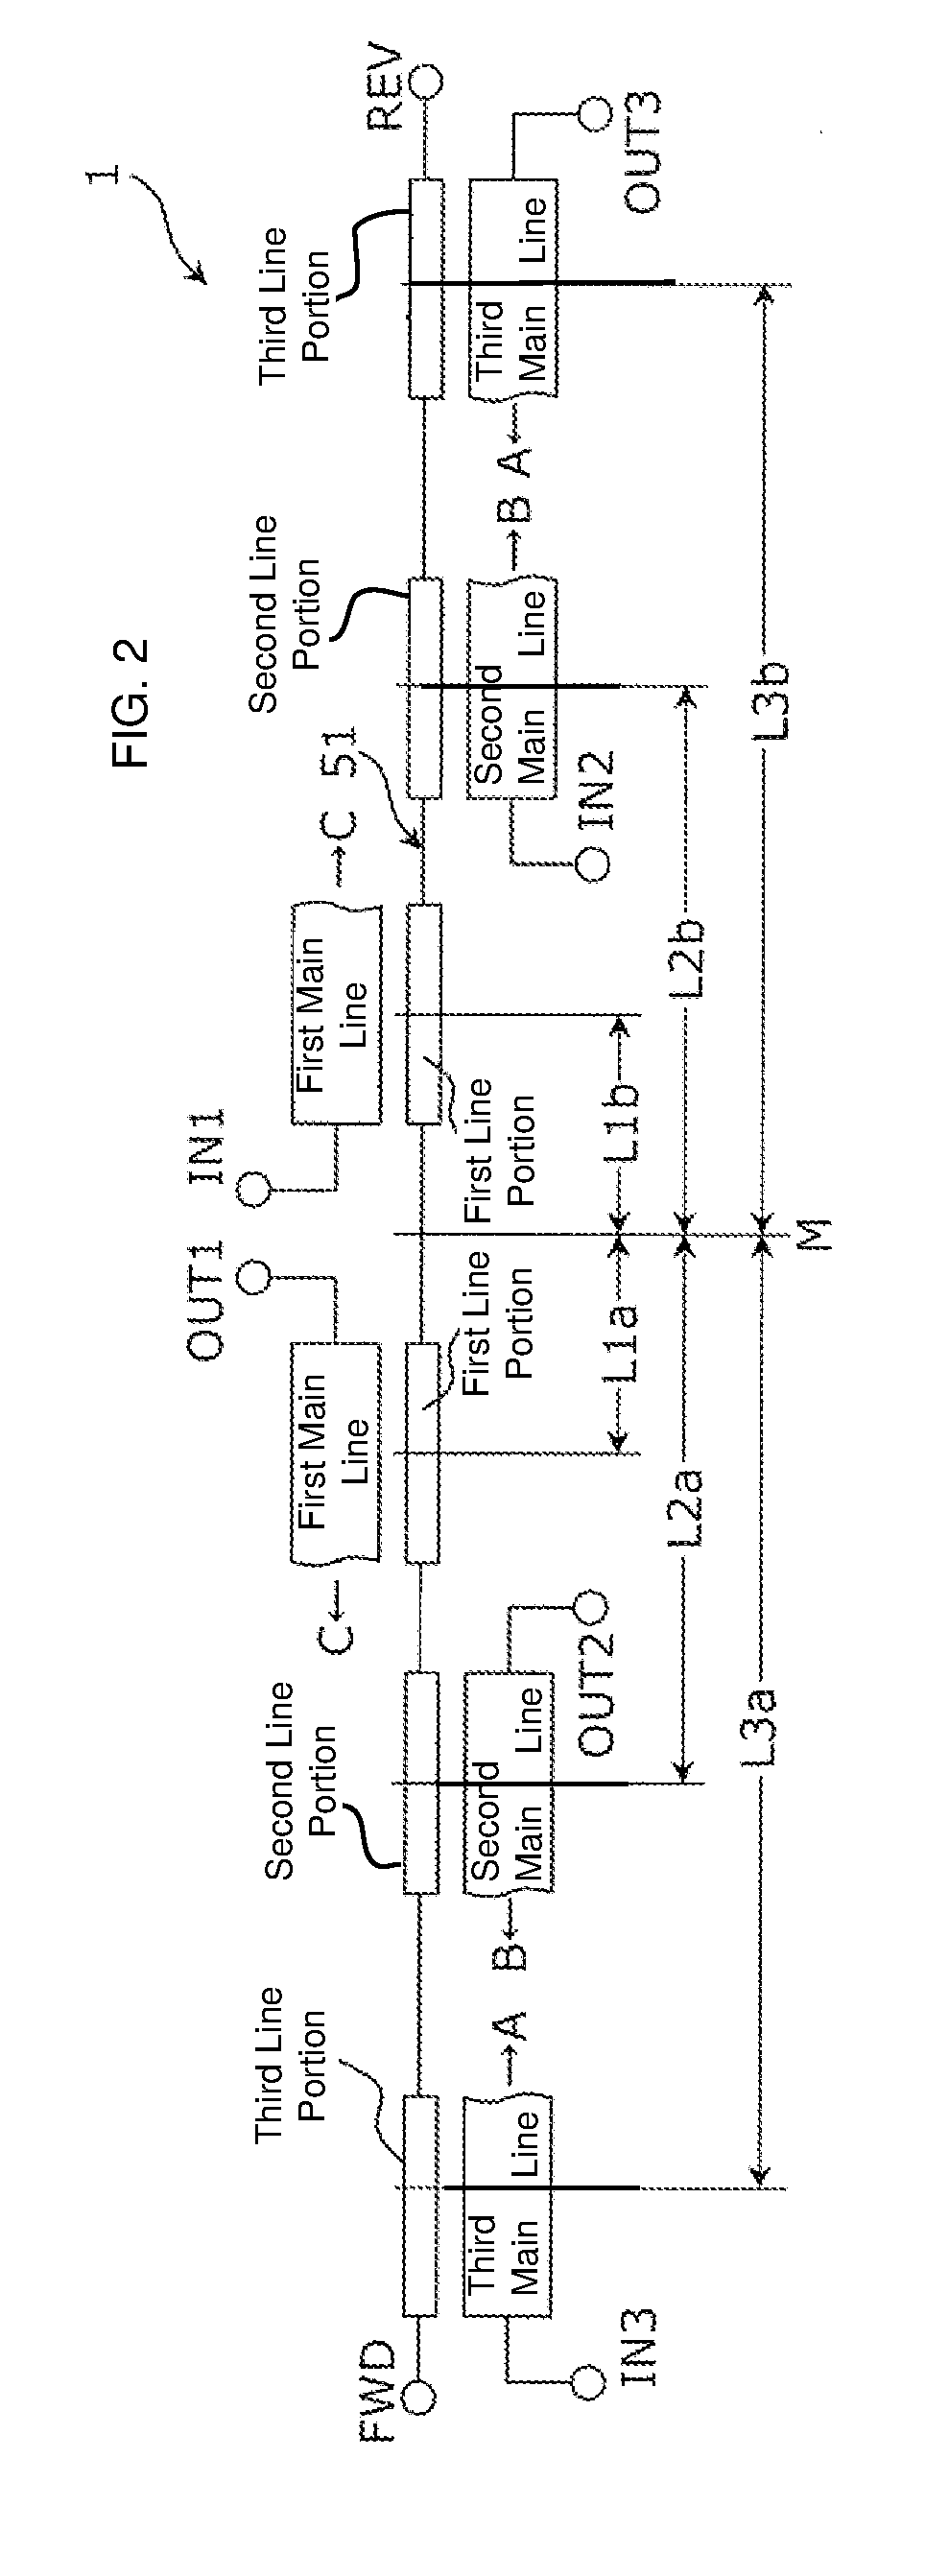 Bidirectional coupler, monitor circuit, and front end circuit